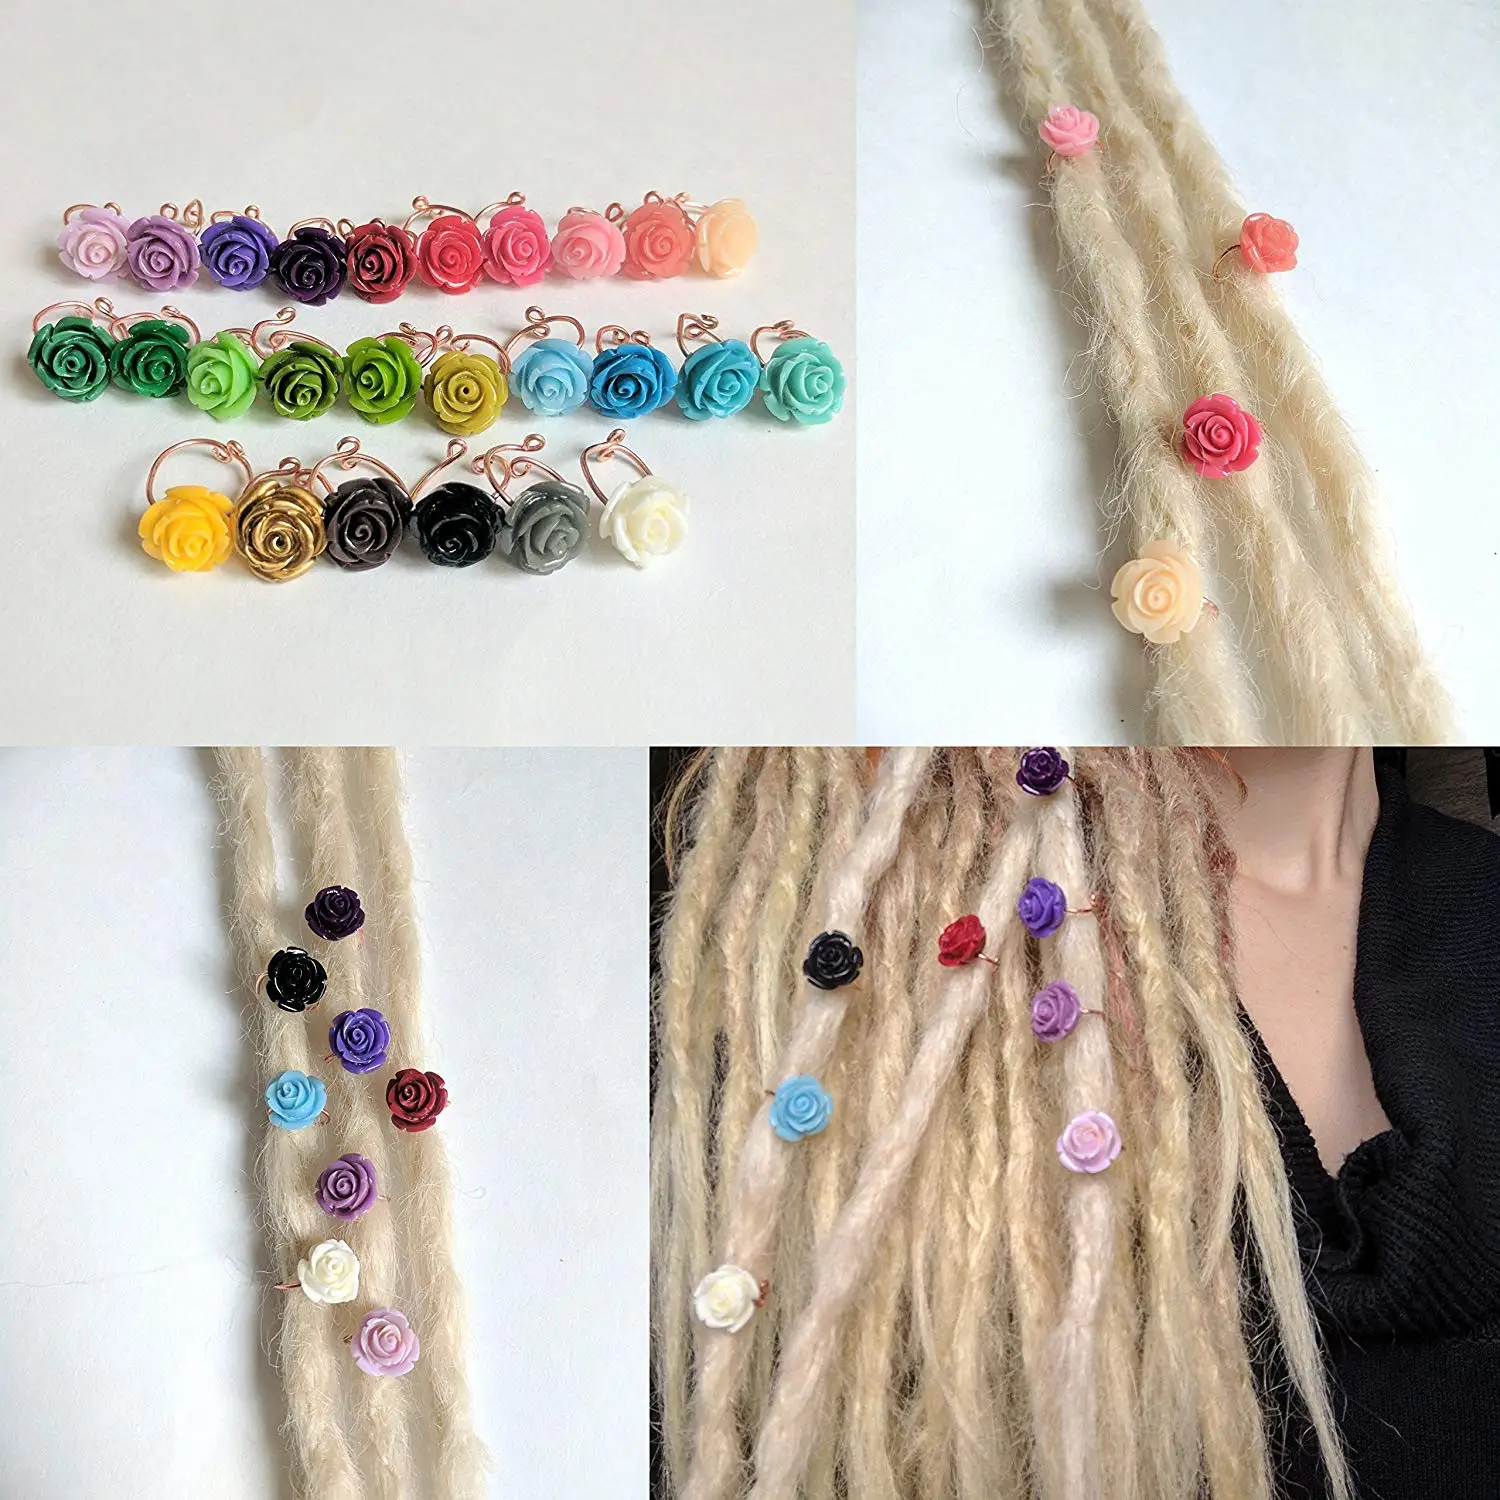 dreads Handmade Copper wire dreadlock cuff with resin rose accent in your color choice dread beads Dreadlock accessories Iconic Locks Adjustable Rose Dreadlock Ring Bead